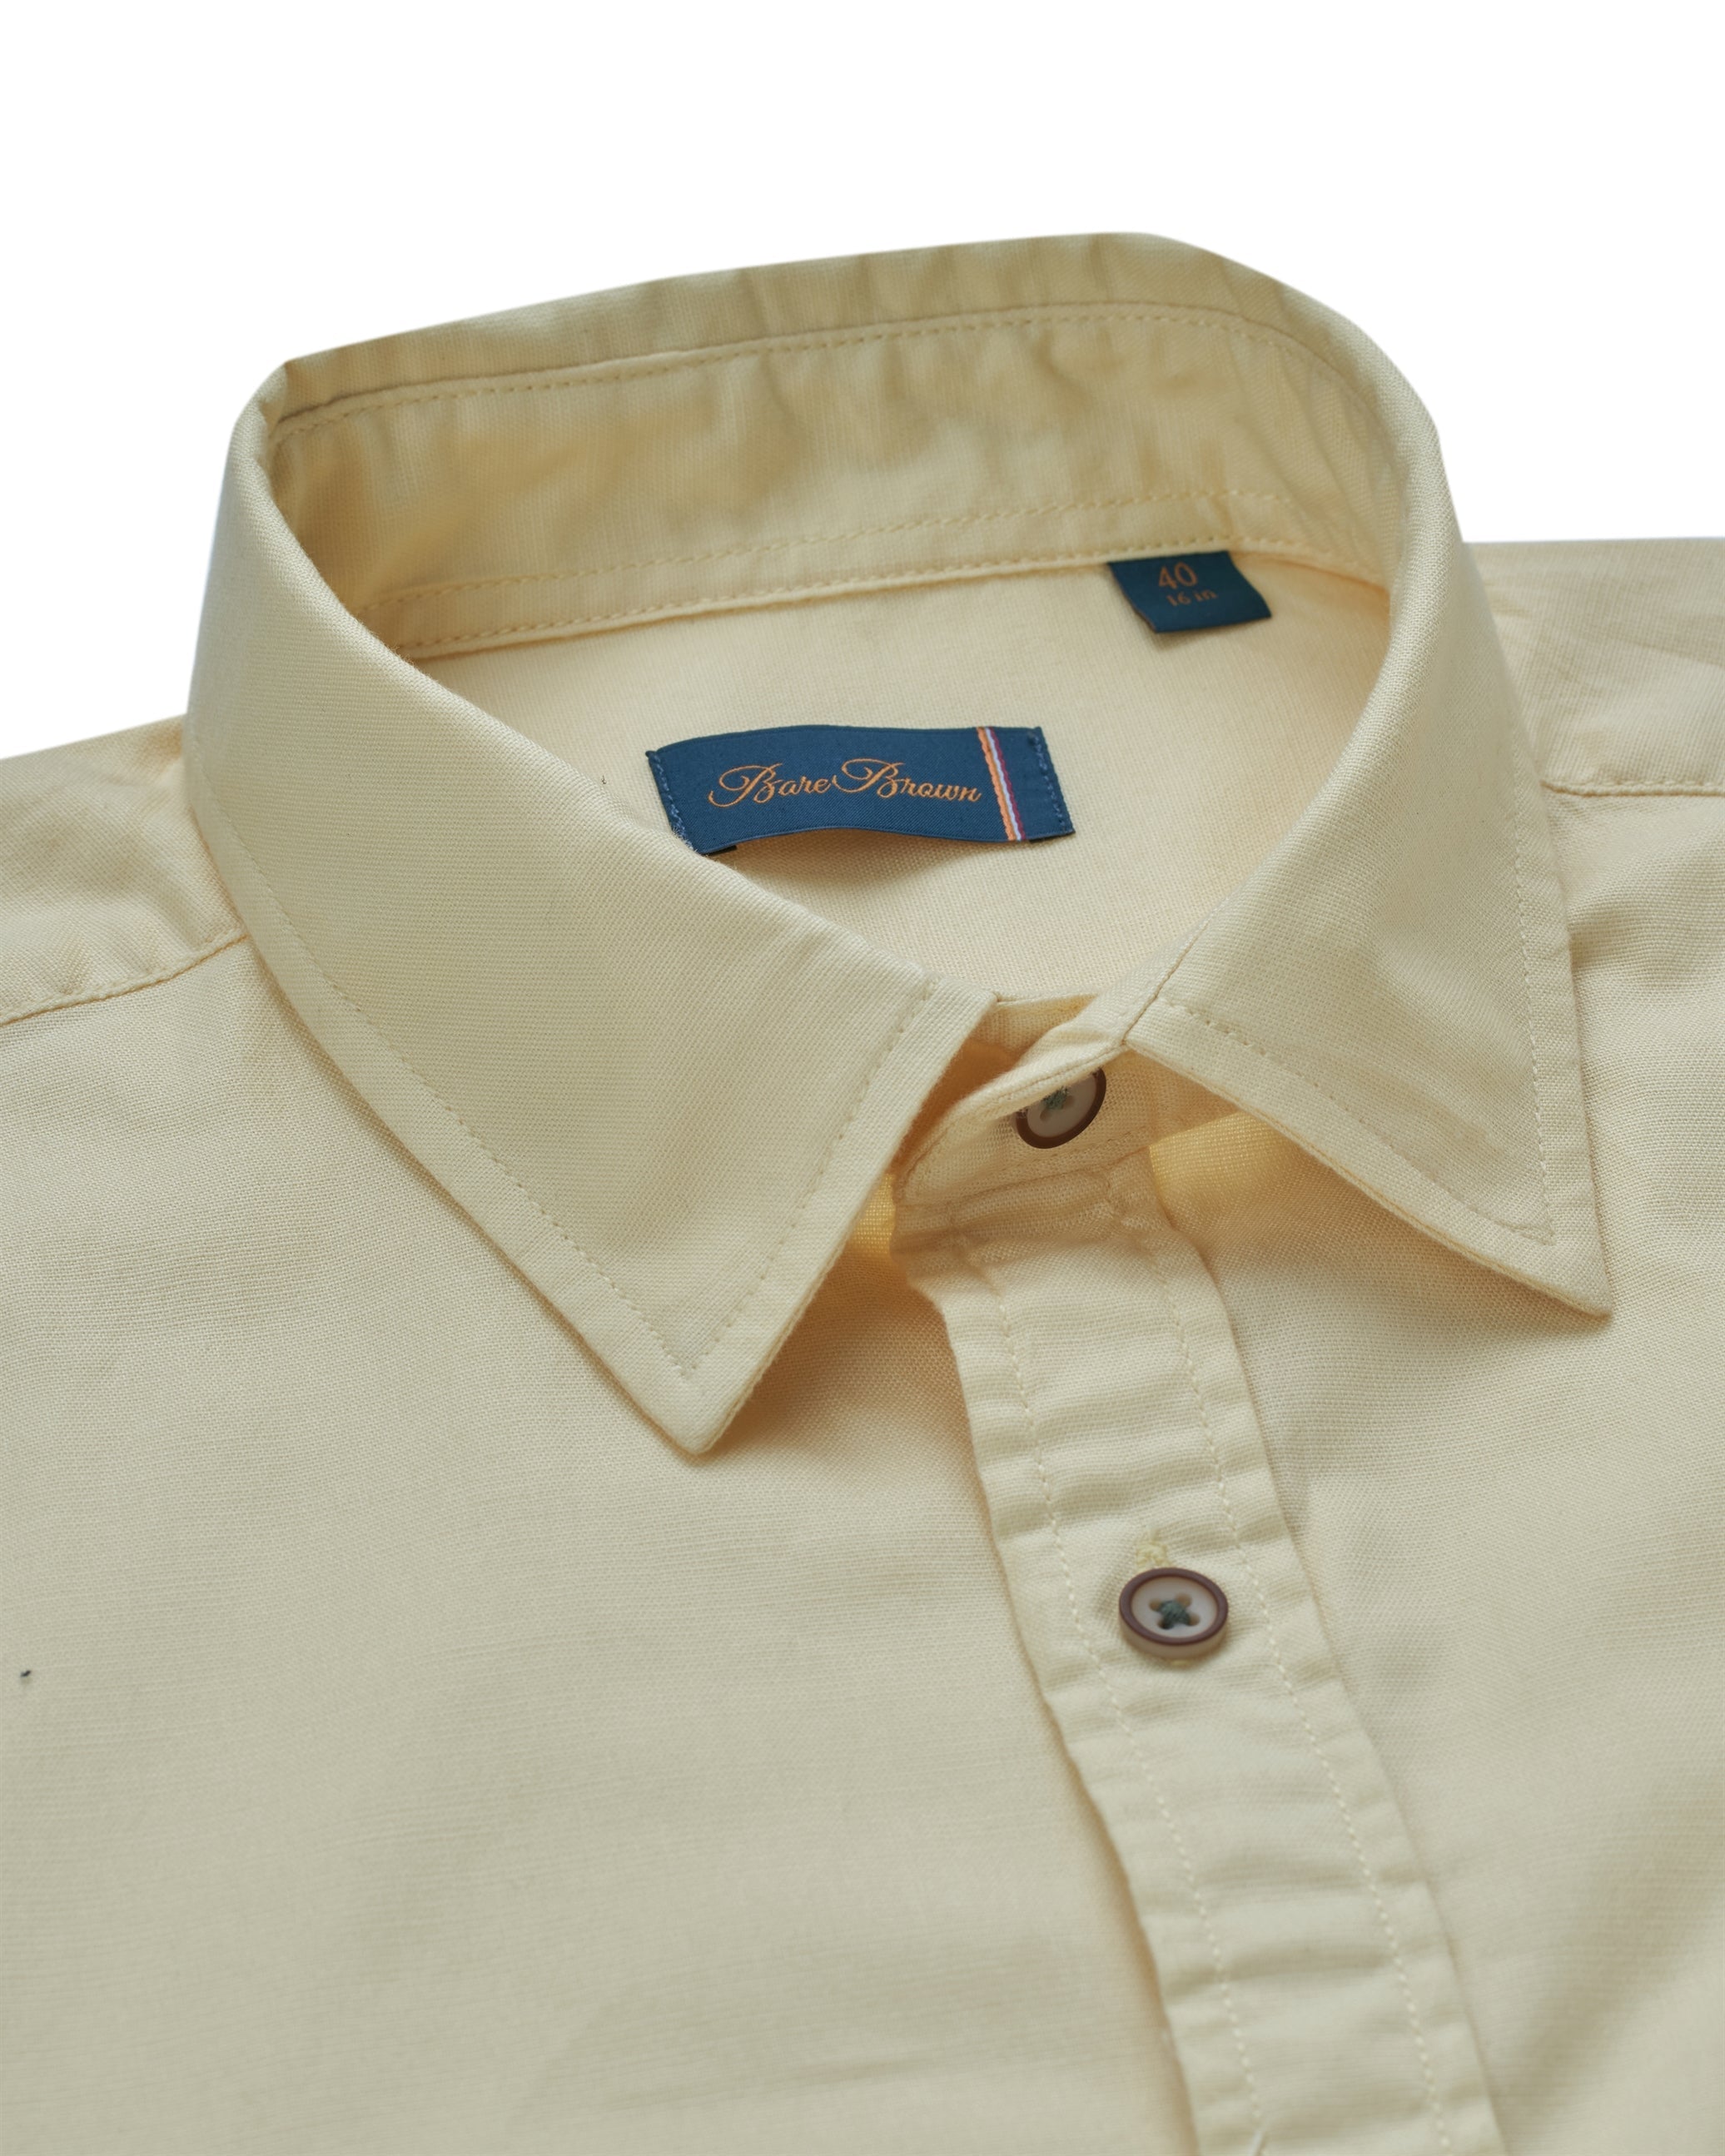 Bare Brown - Light Yellow Stretch Cotton Shirt, Slim Fit